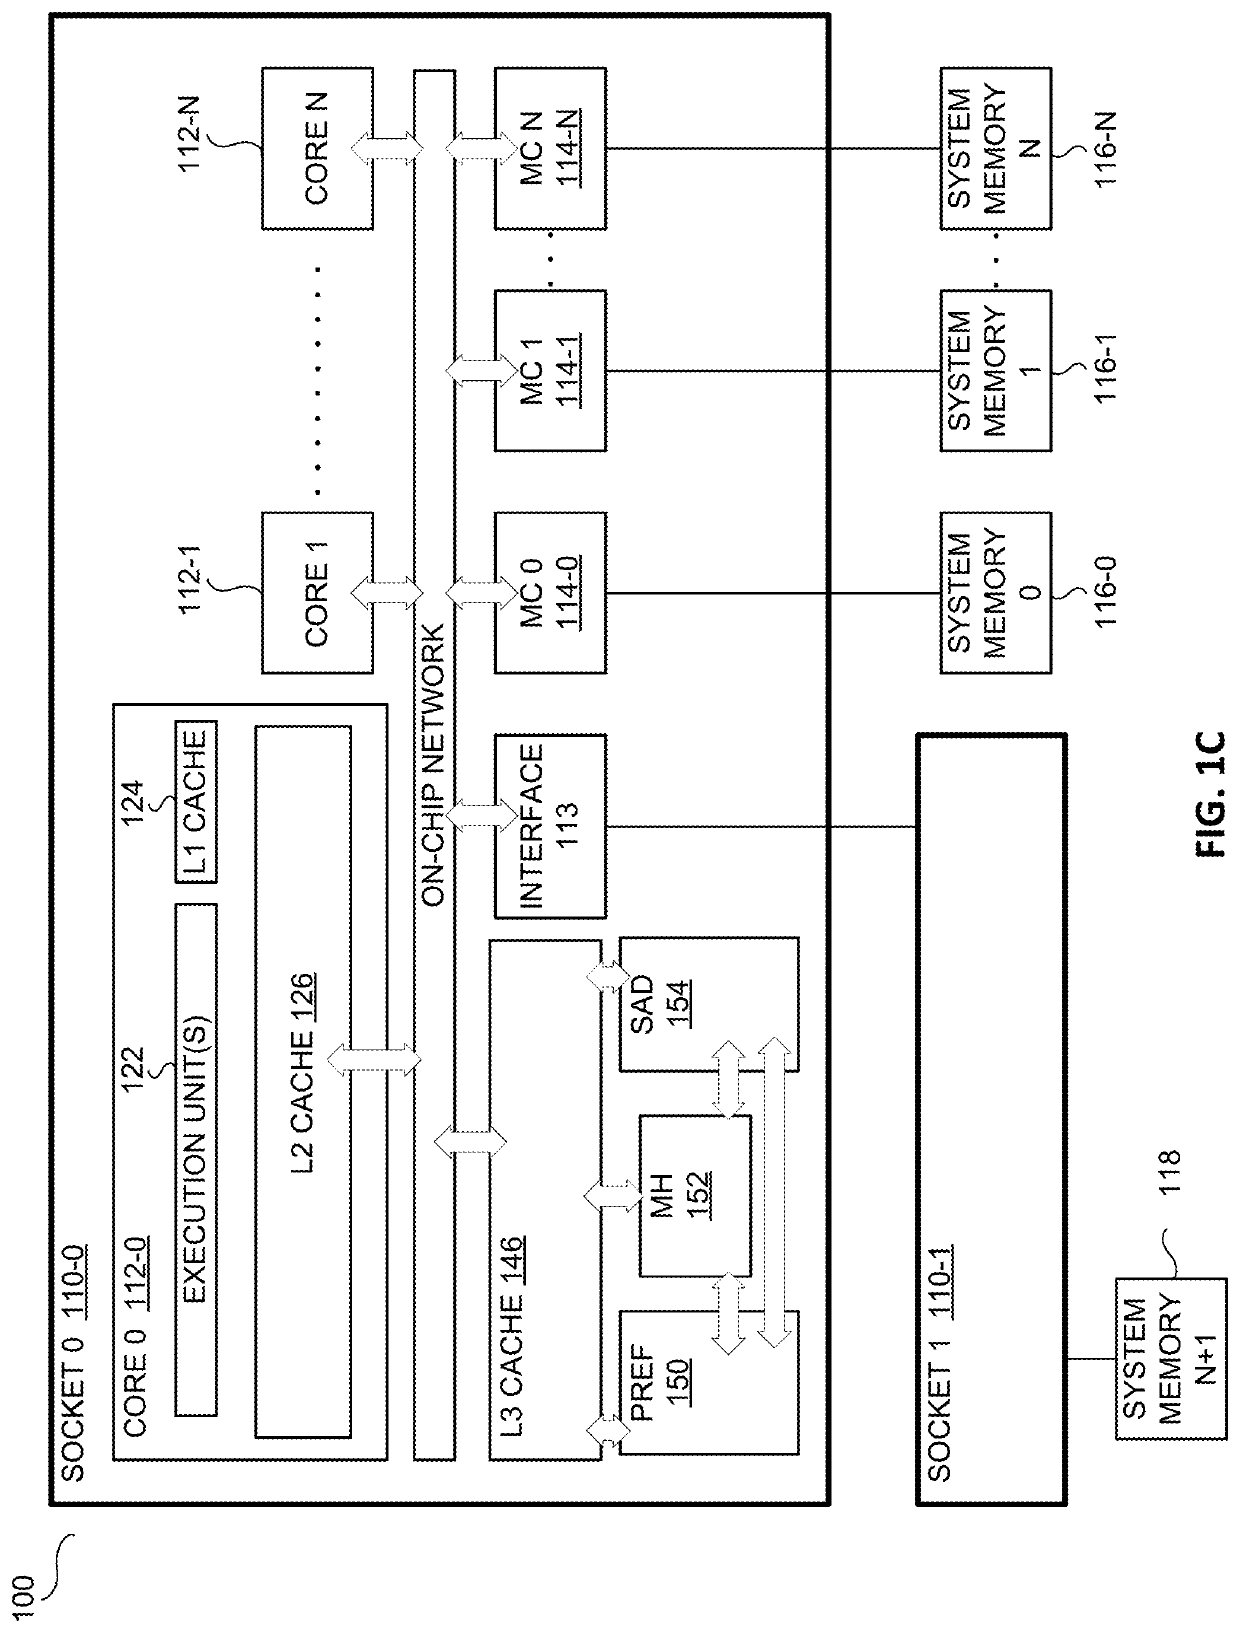 Apparatus, method, and system for enhanced data prefetching based on non-uniform memory access (NUMA) characteristics